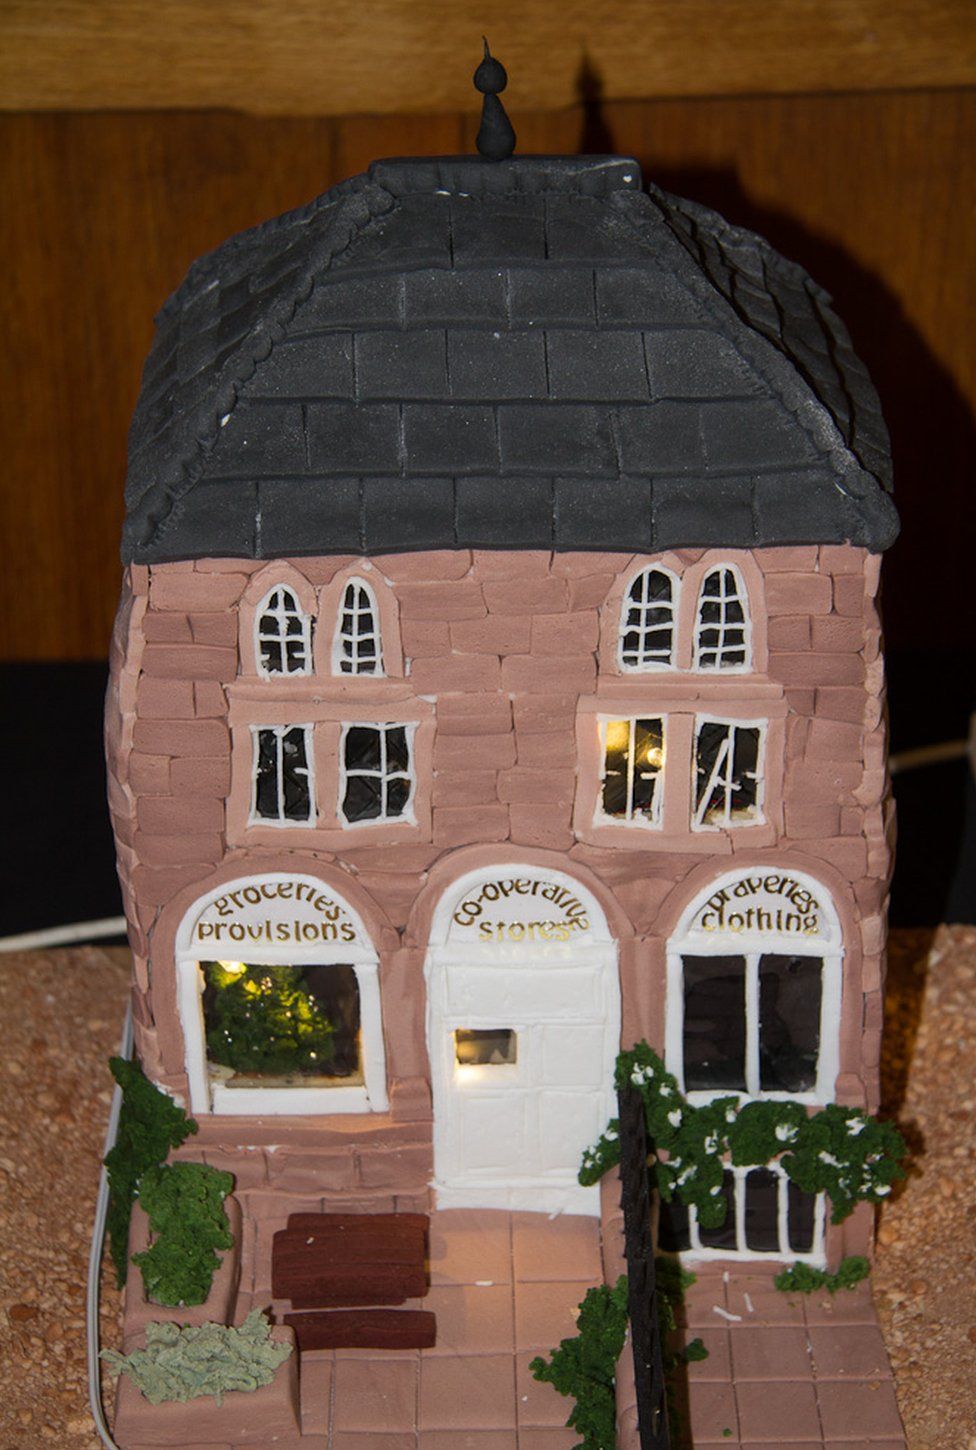 Co-op made from cake